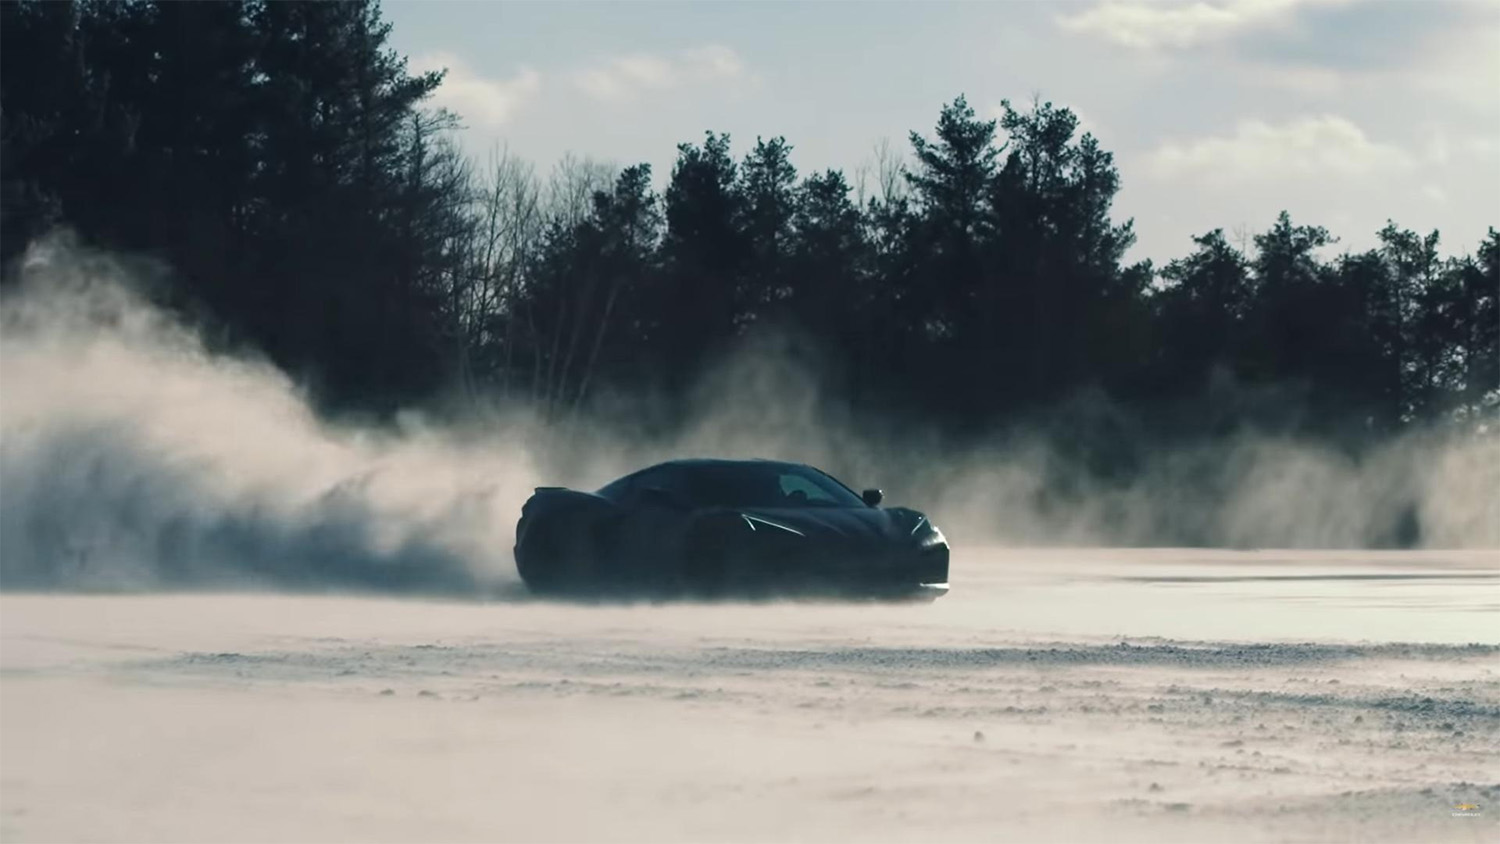 Electrified Chevrolet Corvette drifting through the snow  could be a confirmation of the rumored hybrid all-wheel drive Corvette ZR1